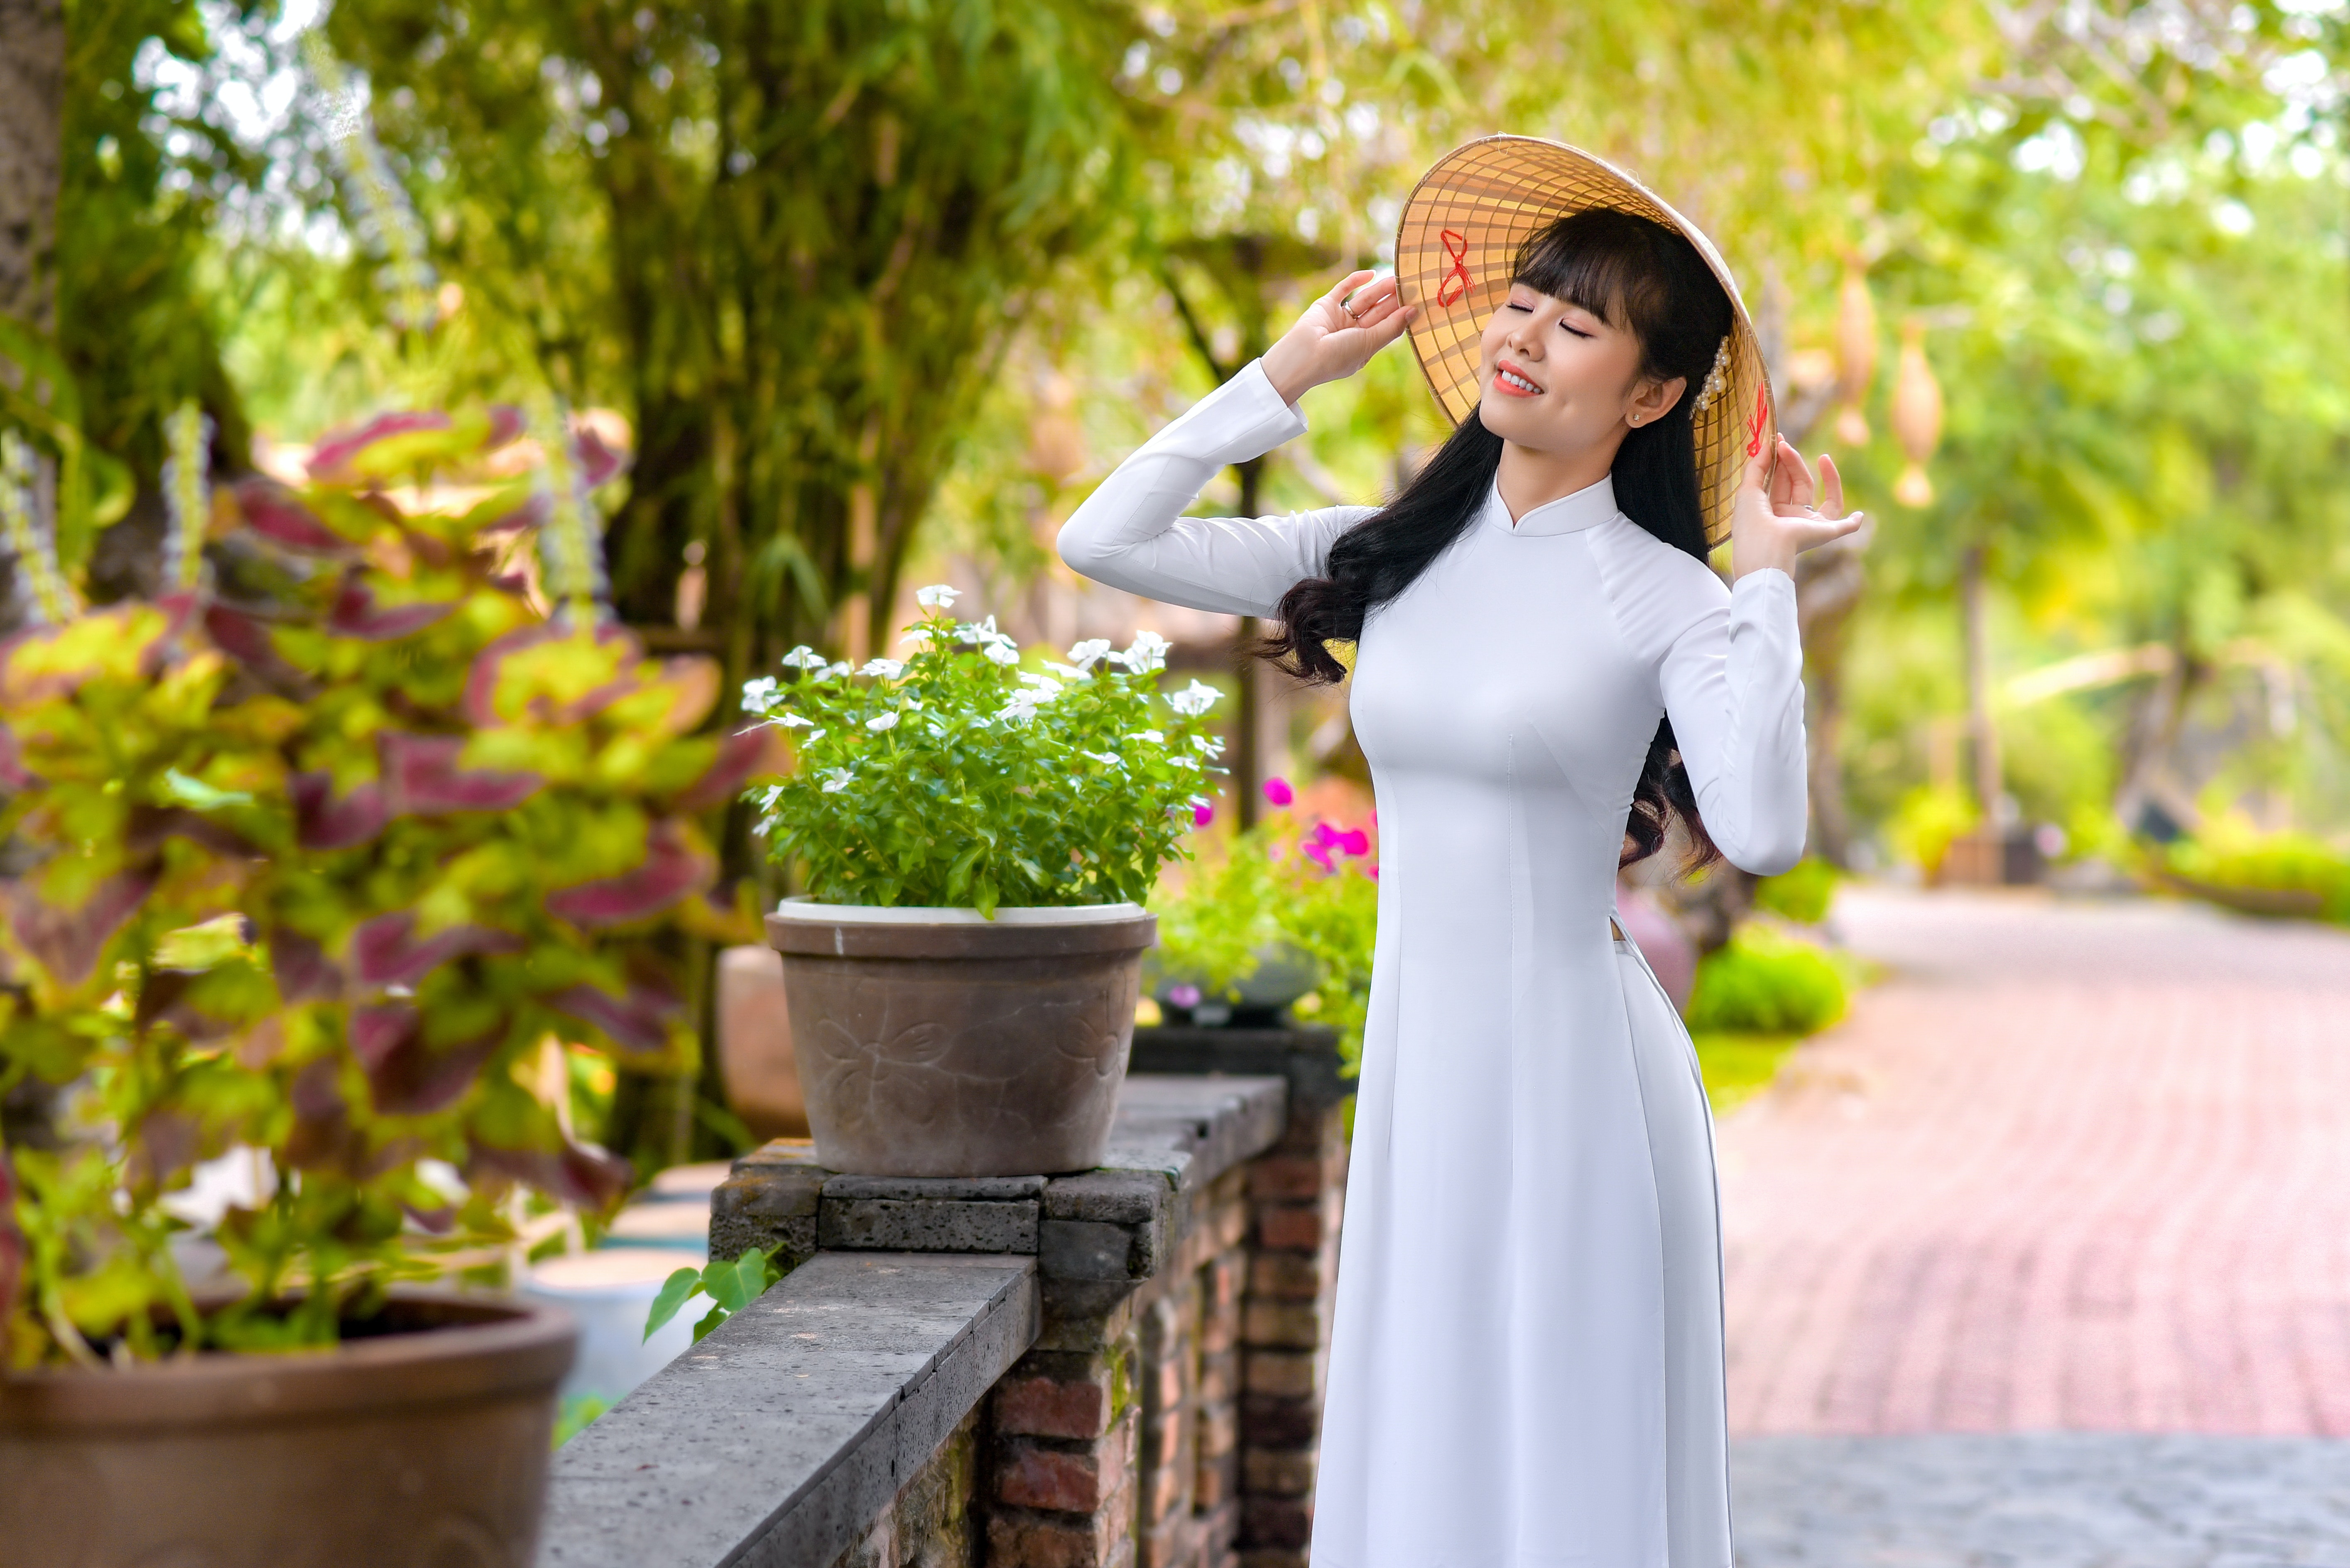 Traditional Dress of Vietnam: A look at Vietnam's Multi-Ethnic Culture!